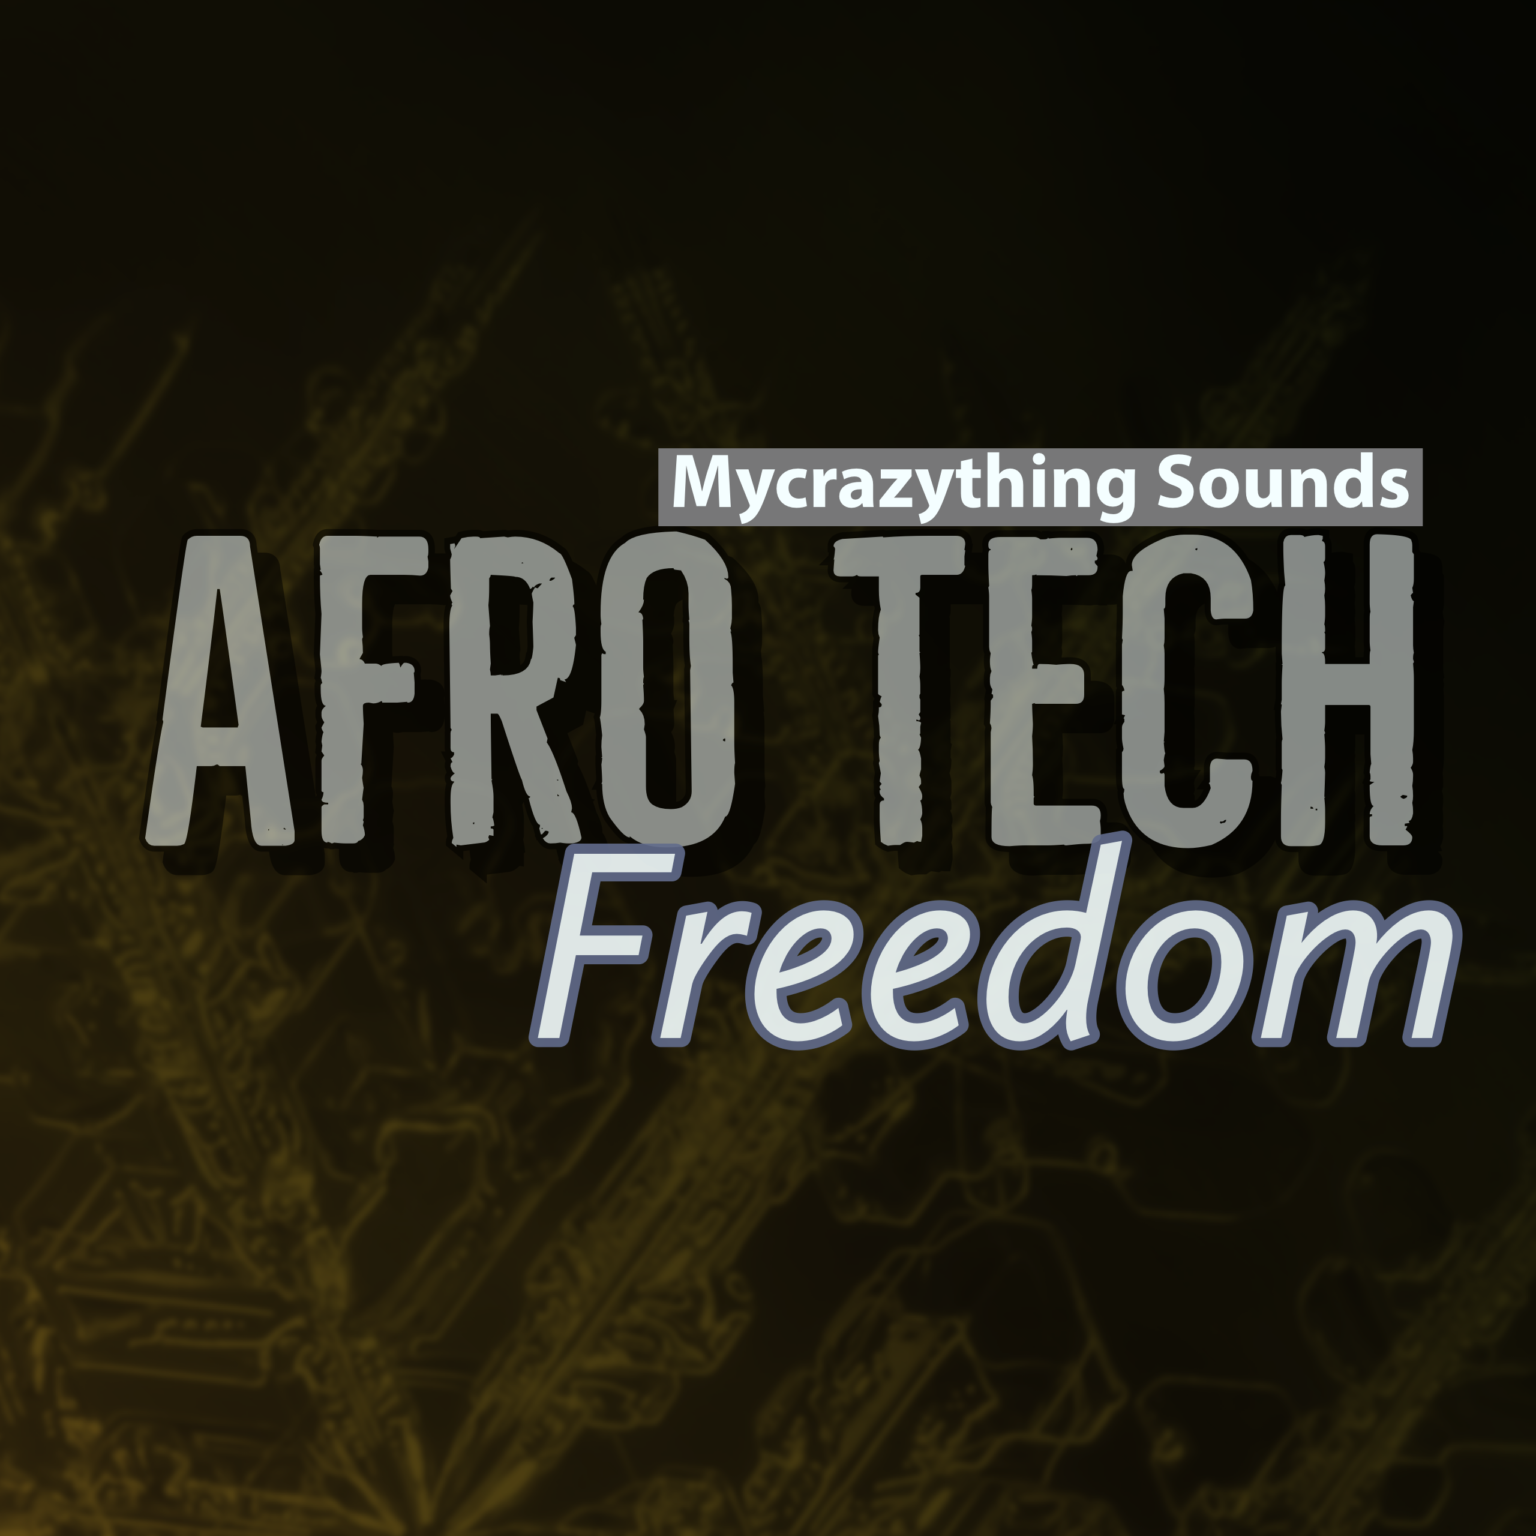 Afro Tech Freedom [Mycrazything sounds] [Download] Myloops